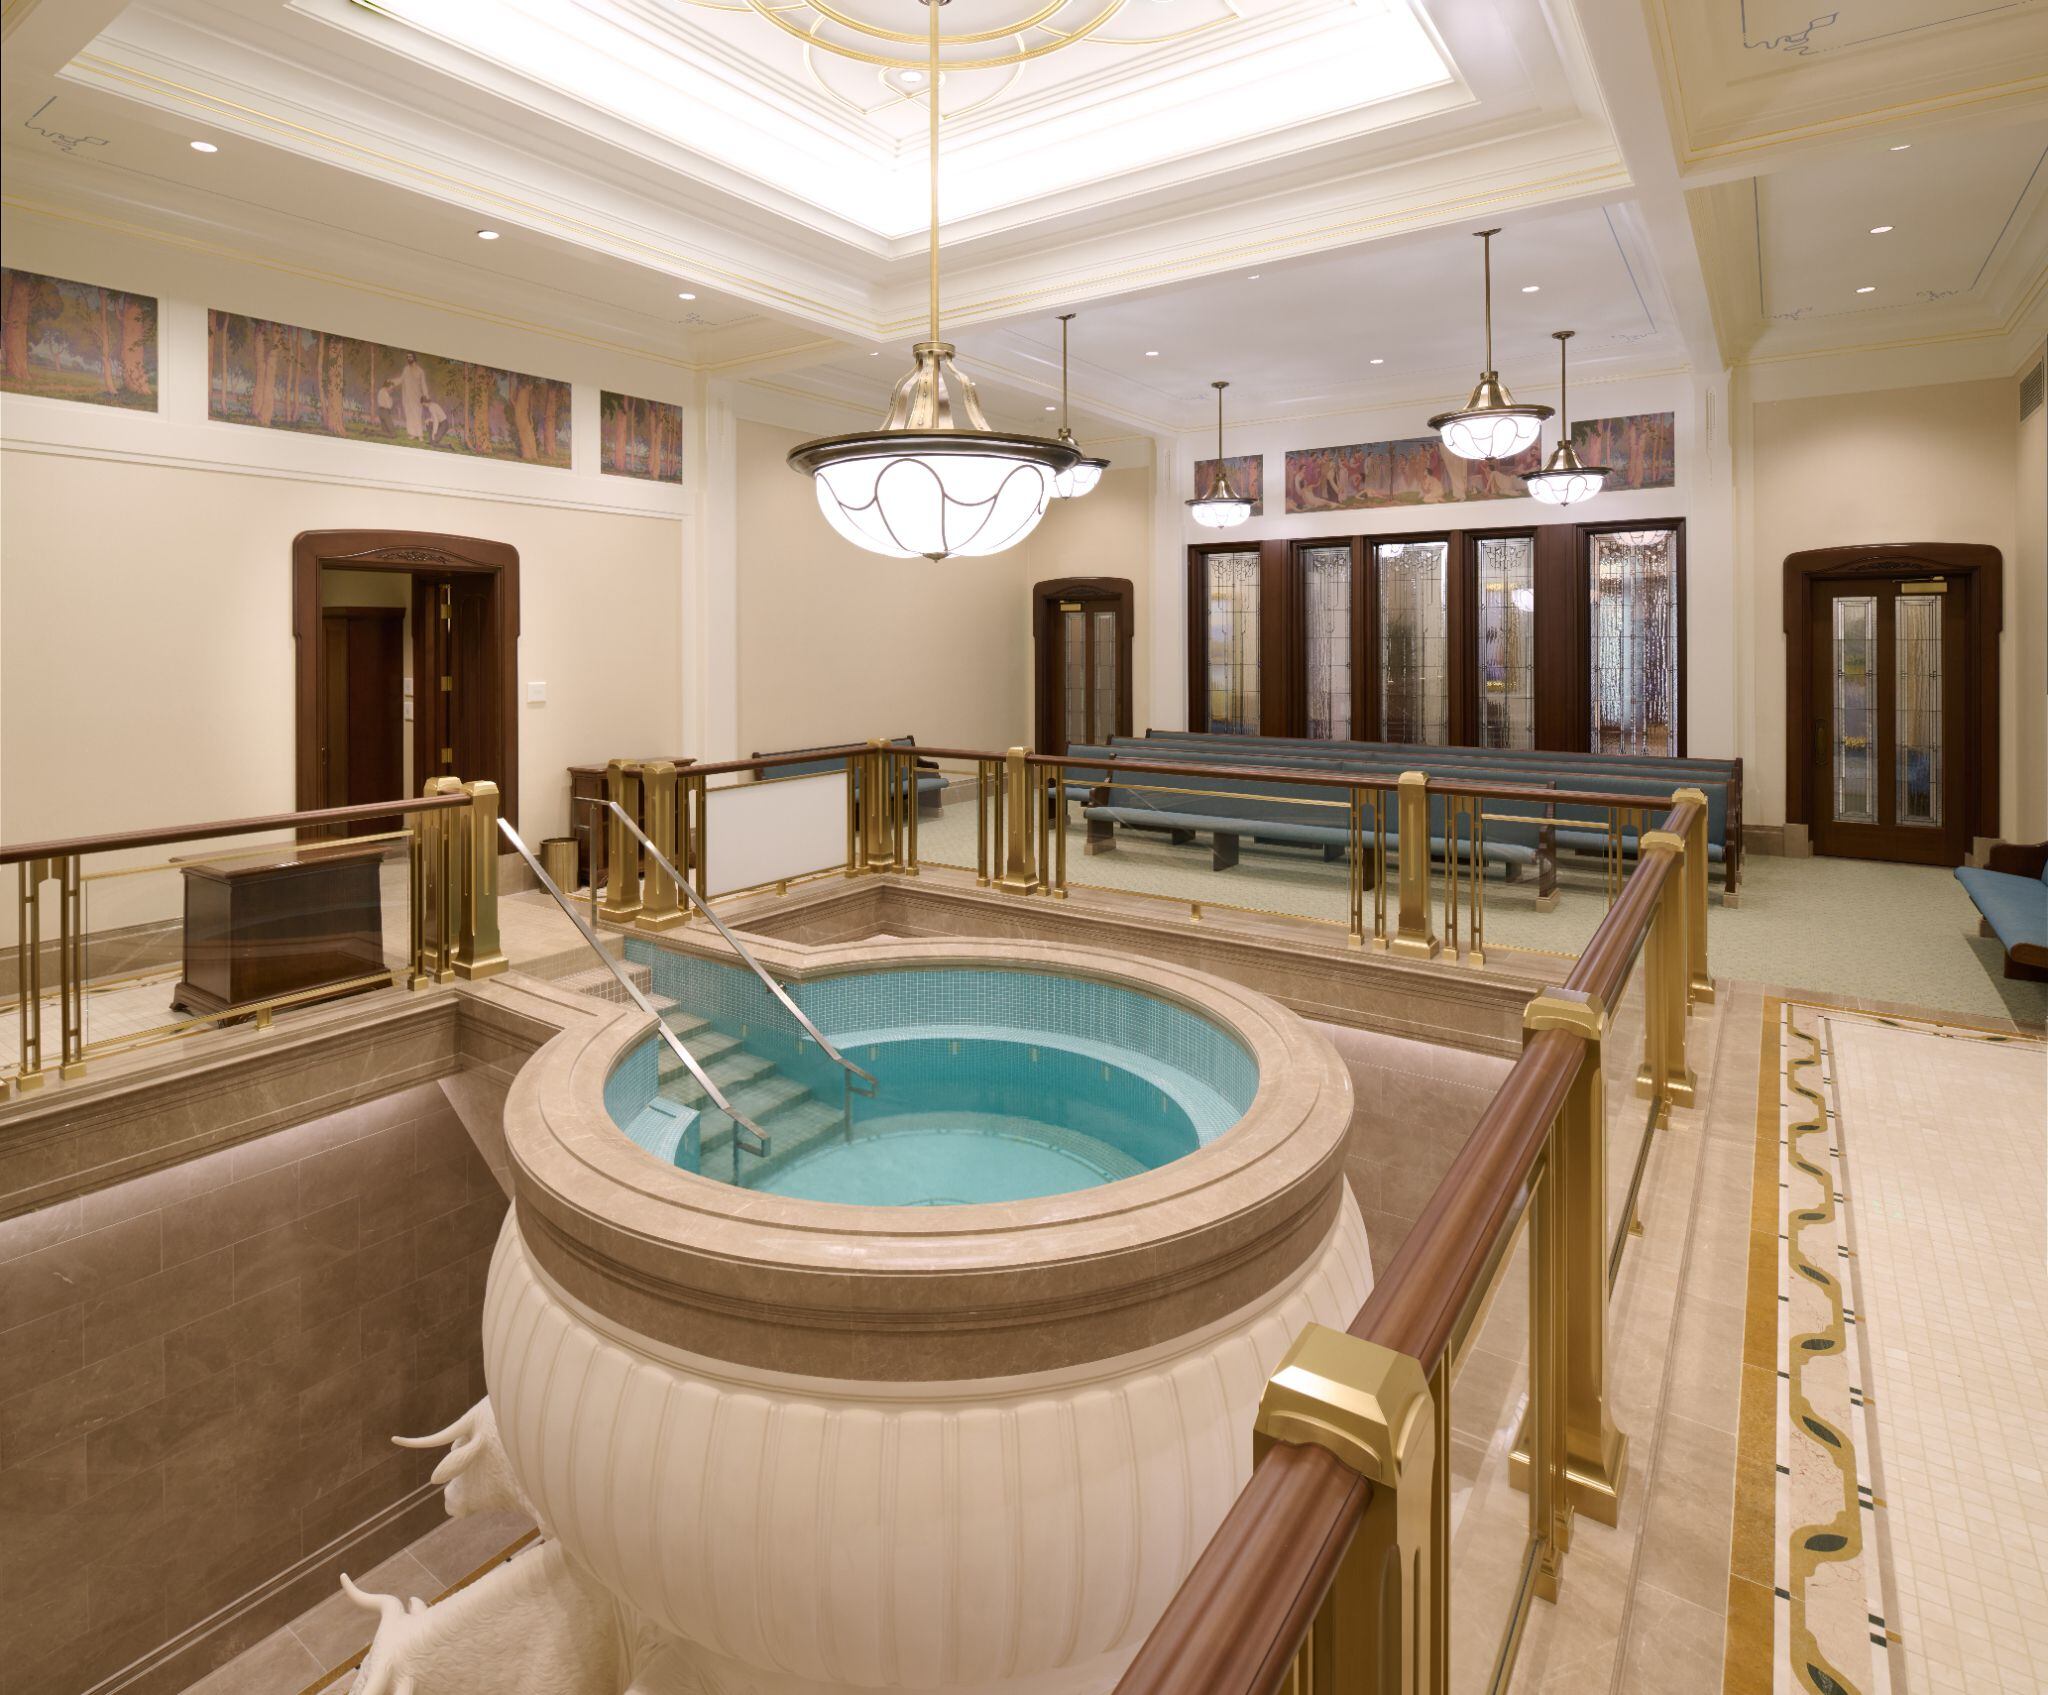 (The Church of Jesus Christ of Latter-day Saints) The baptistry inside the Layton Utah Temple.